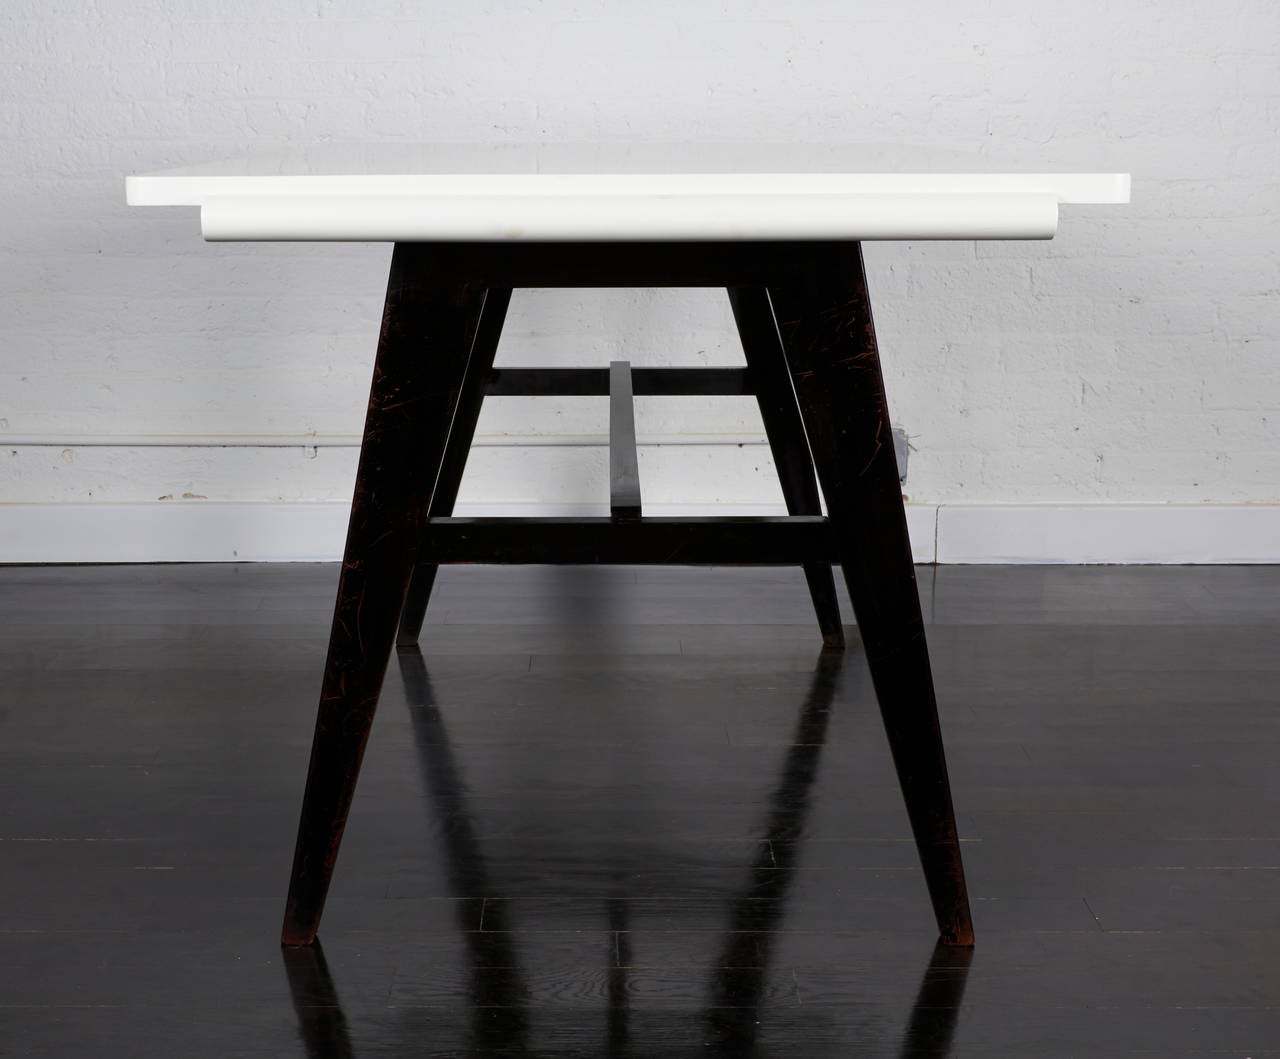 A writing table by British designer Robin Day - 1950, England.
The base is painted black and the top is semi- gloss white lacquer.